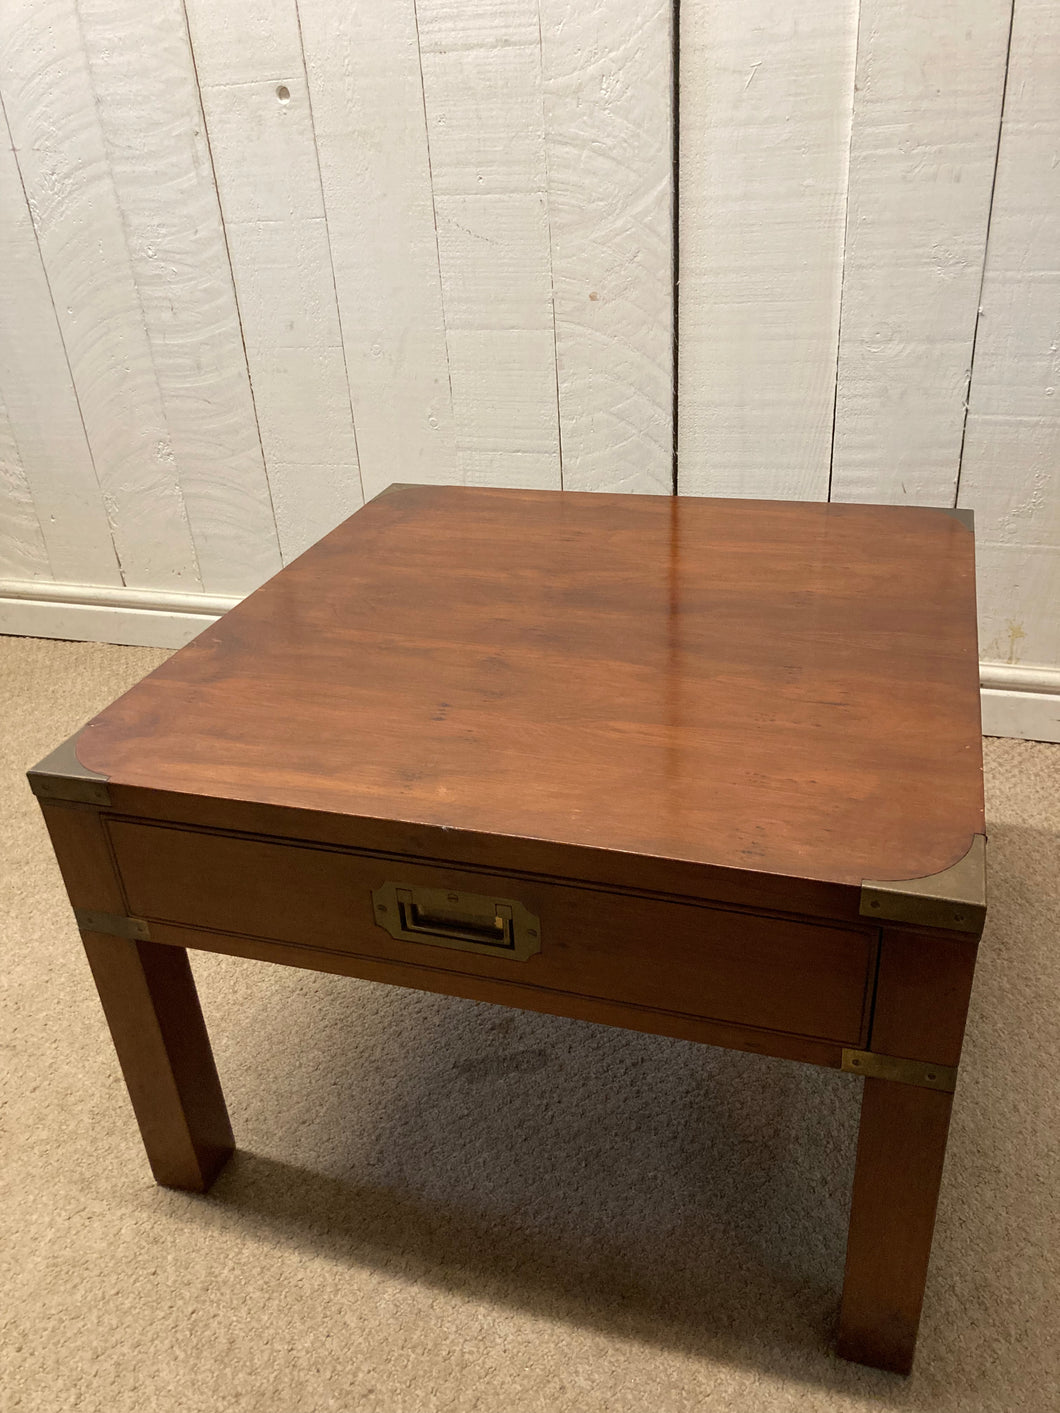 Campaign Style Square Coffee Table With A Drawer